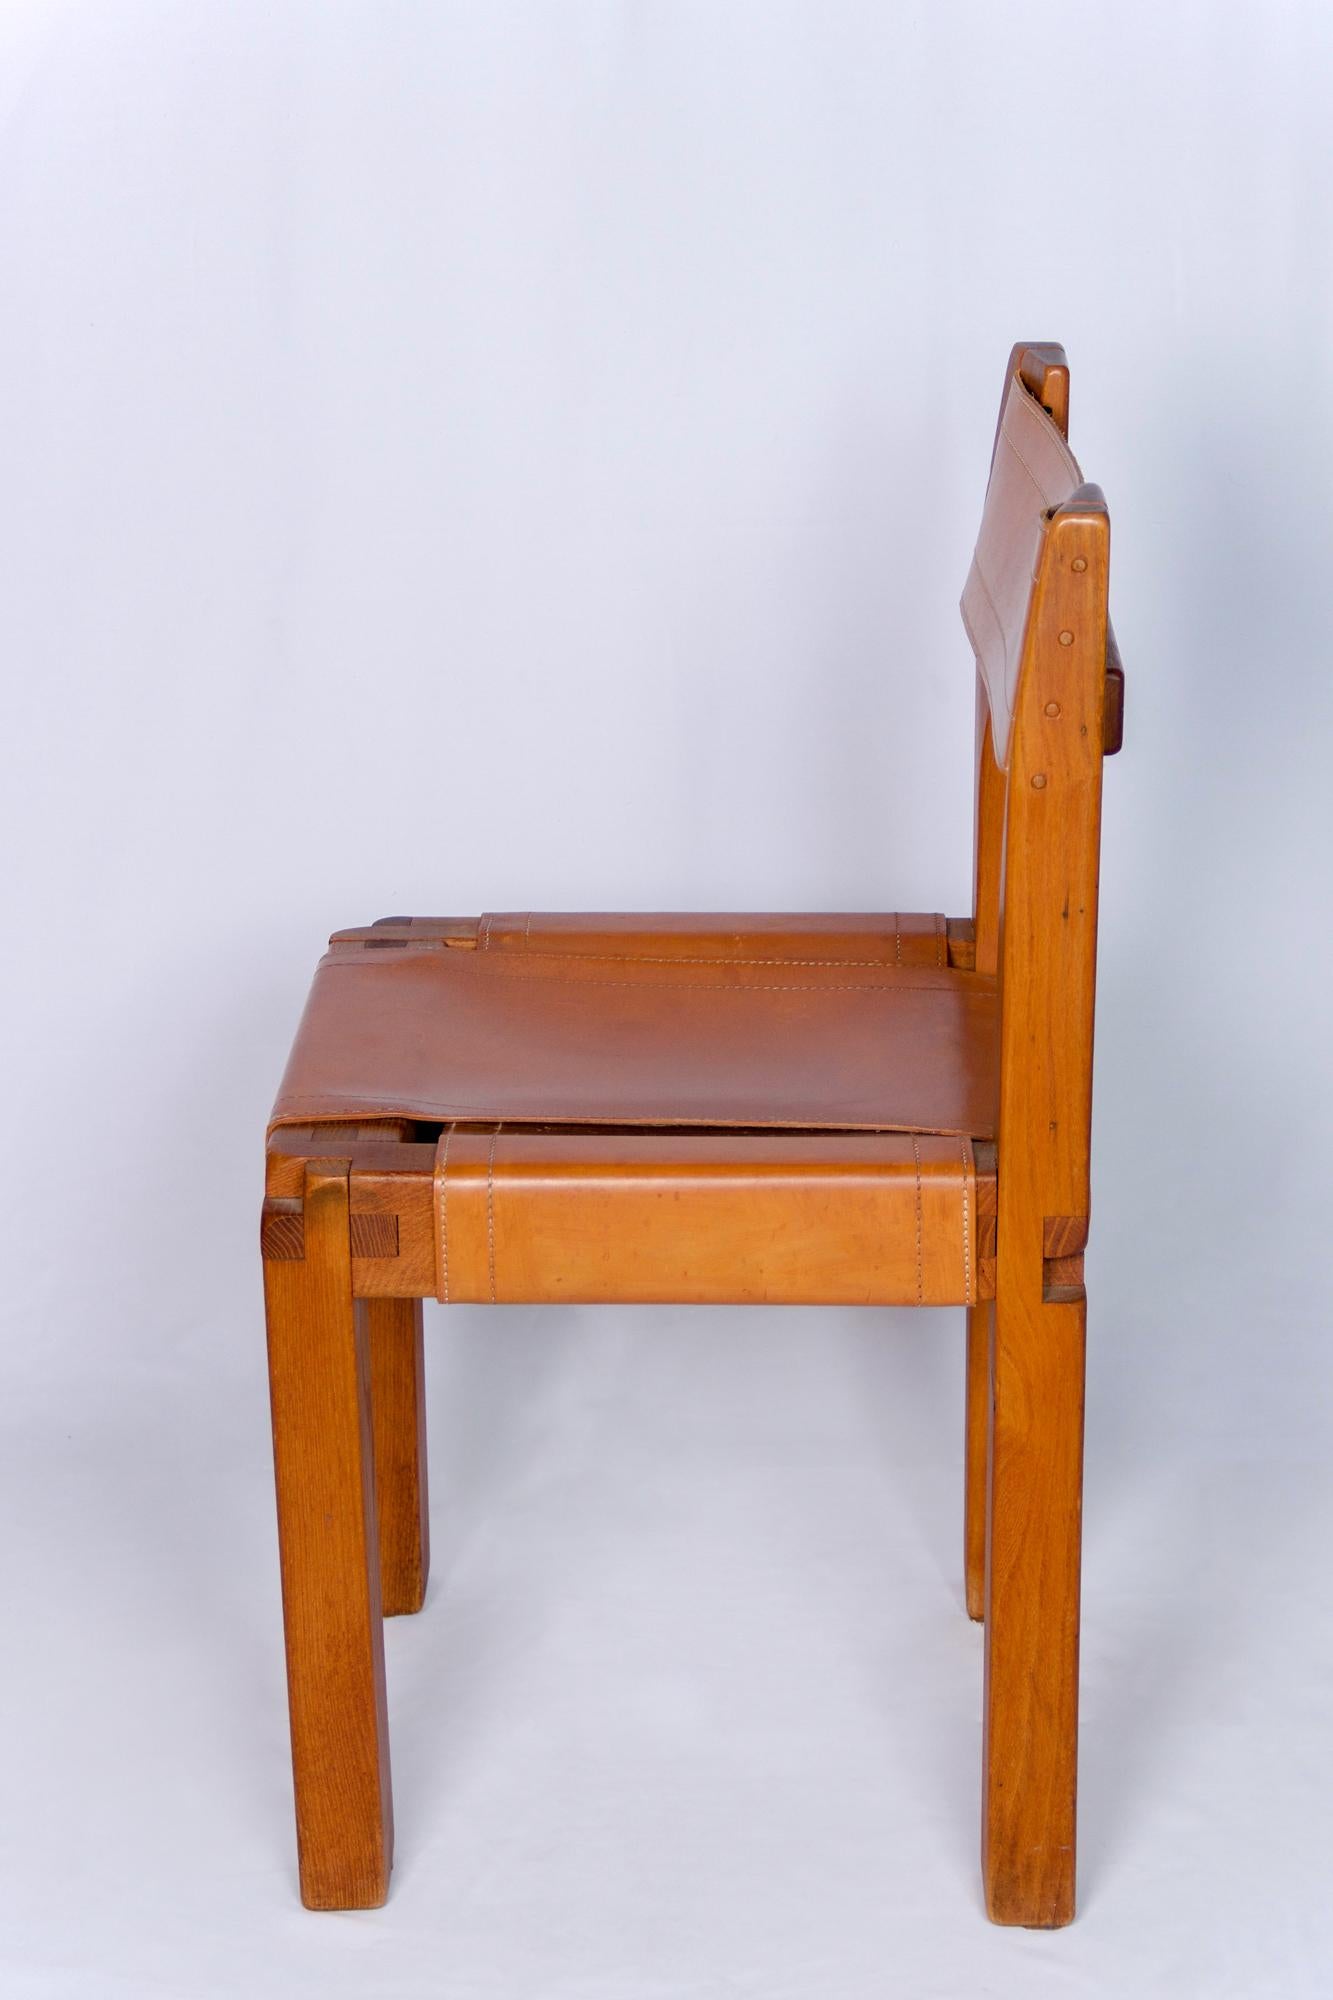 Pierre Chapo (1927-1987)

Desk chair, model S. 11, circa 1960
Elm wood, stitched Havana leather seat and back
Stamped 'Chapo'

Measures: Haut. 78 cm - assise : 43 x 43 cm.

This iconic model was exhibited at the Salon des Arts Ménagers in